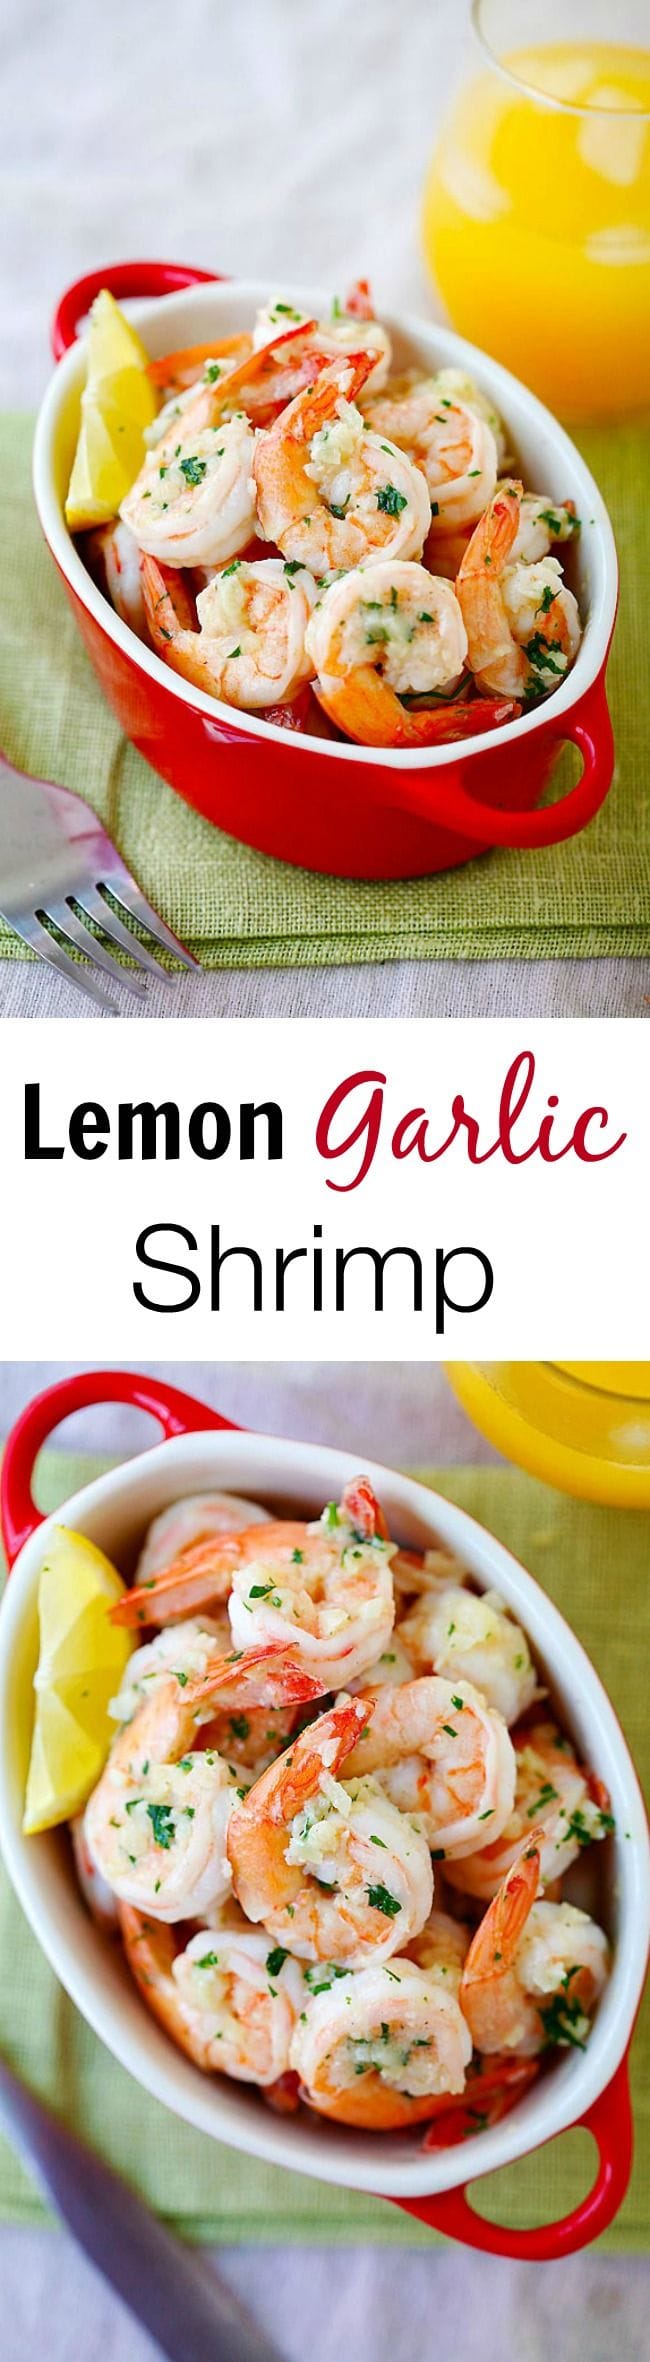 Lemon Garlic Shrimp - easiest and best shrimp recipe with garlic, shrimp, butter and lemon, all ready in 20 mins. Perfect as appetizer or with pasta | rasamalaysia.com